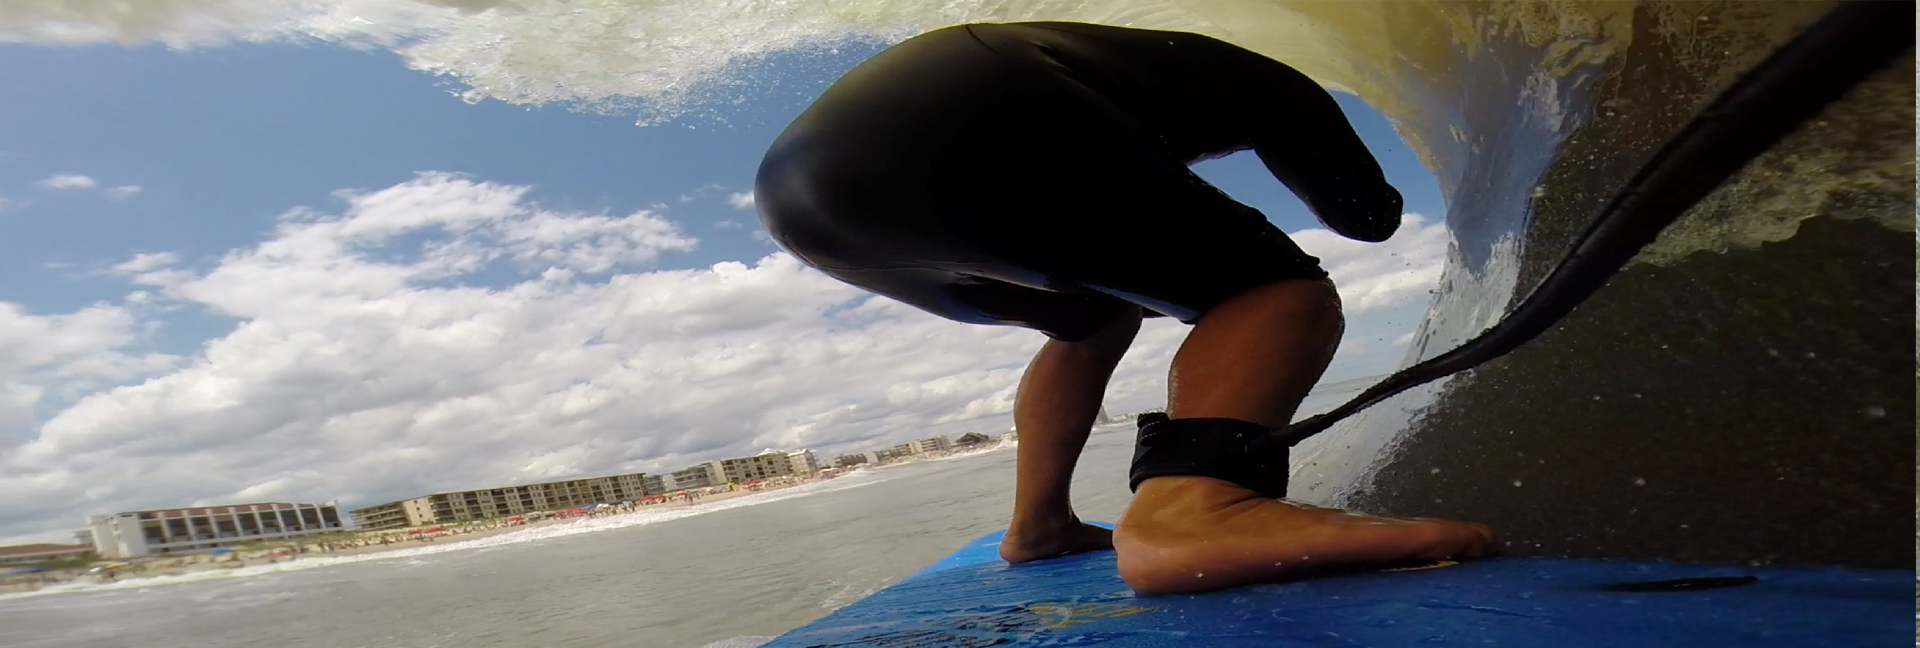 POV from behind surfer as they surf through a wave